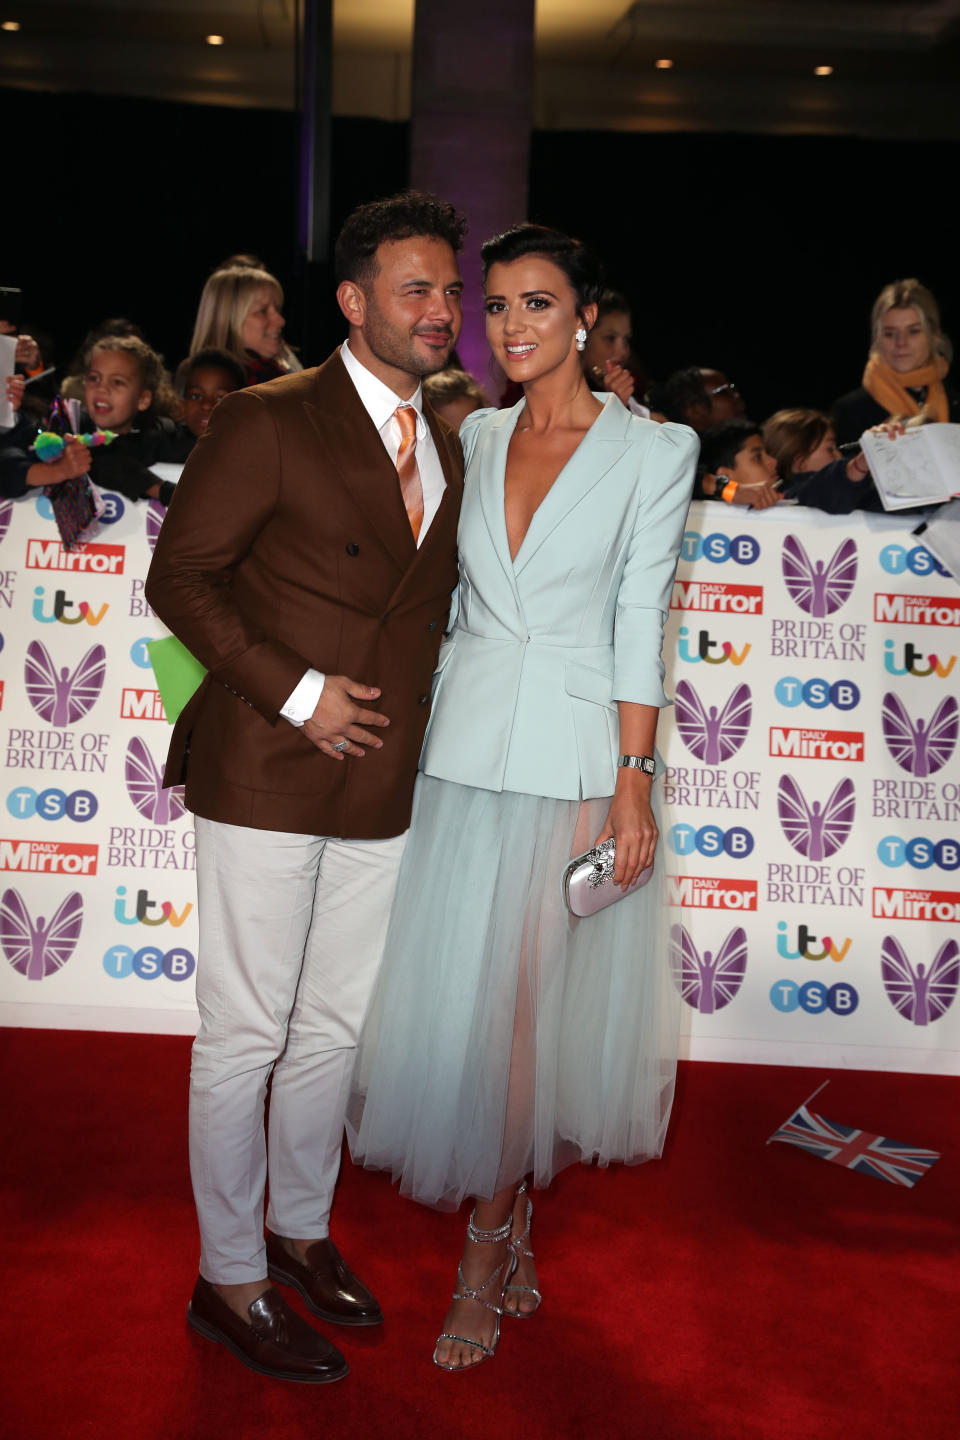 Ryan Thomas and Lucy Mecklenburgh during the Pride Of Britain Awards 2018, in partnership with TSB, honouring the nation's unsung heroes and recognising the amazing achievements of ordinary people, held at the Grosvenor House Hotel, London. (Photo by Steve Parsons/PA Images via Getty Images)